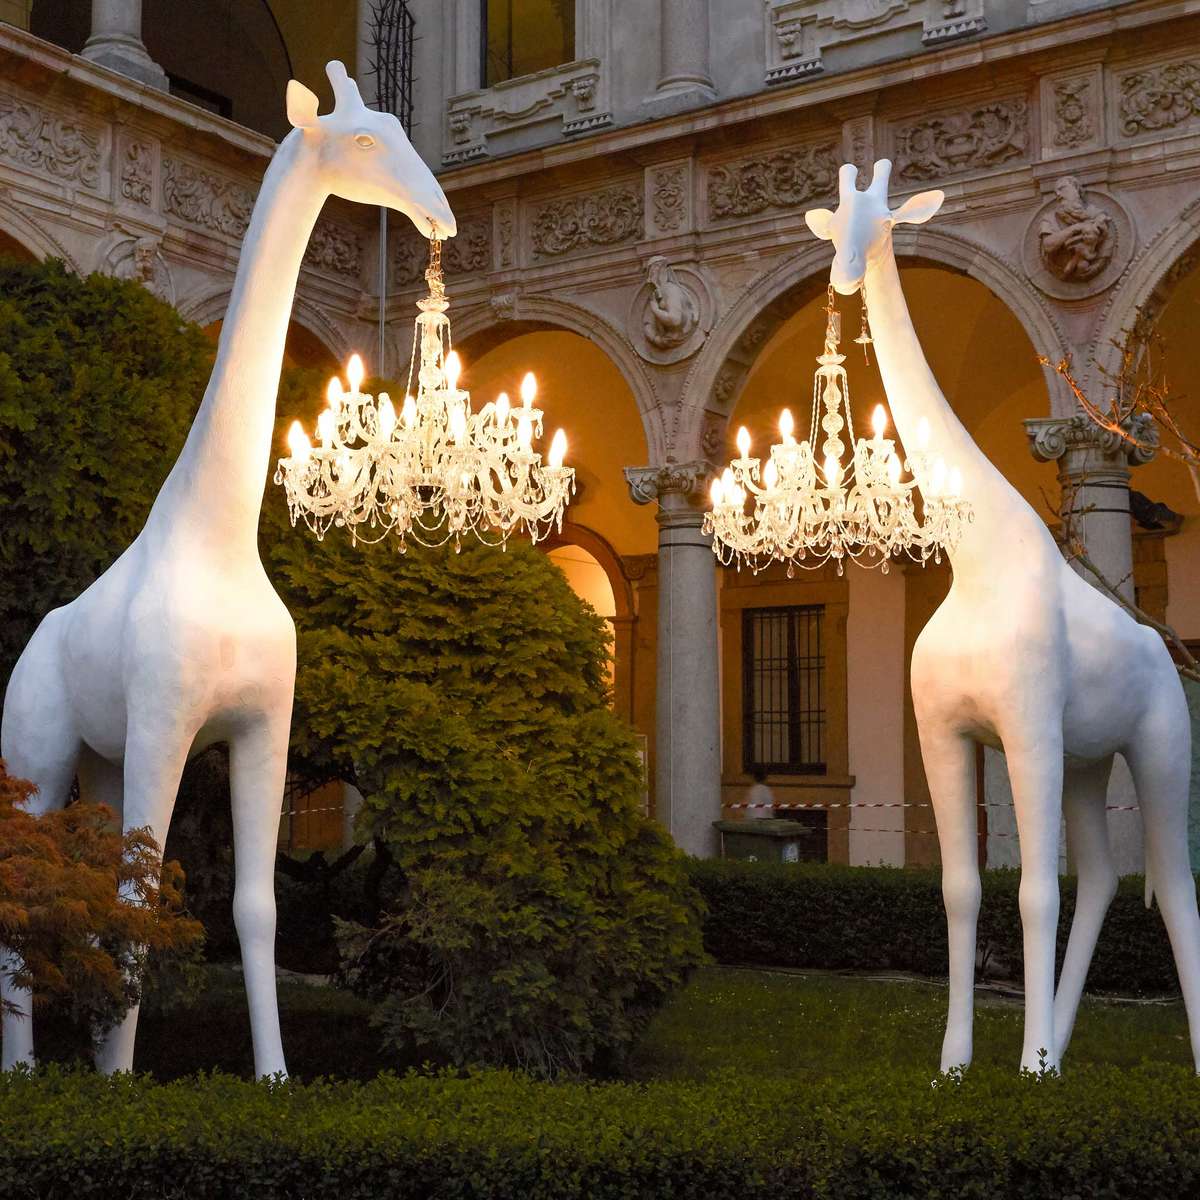 Giraffe in Love Indoor is a phenomenal lamp, designed by Marcantonio, with the size of the authentic young giraffe. The majestic giraffe holds a chandelier in the style of Maria Teresa in a miniature version. This is the perfect combination of good design with functionality.